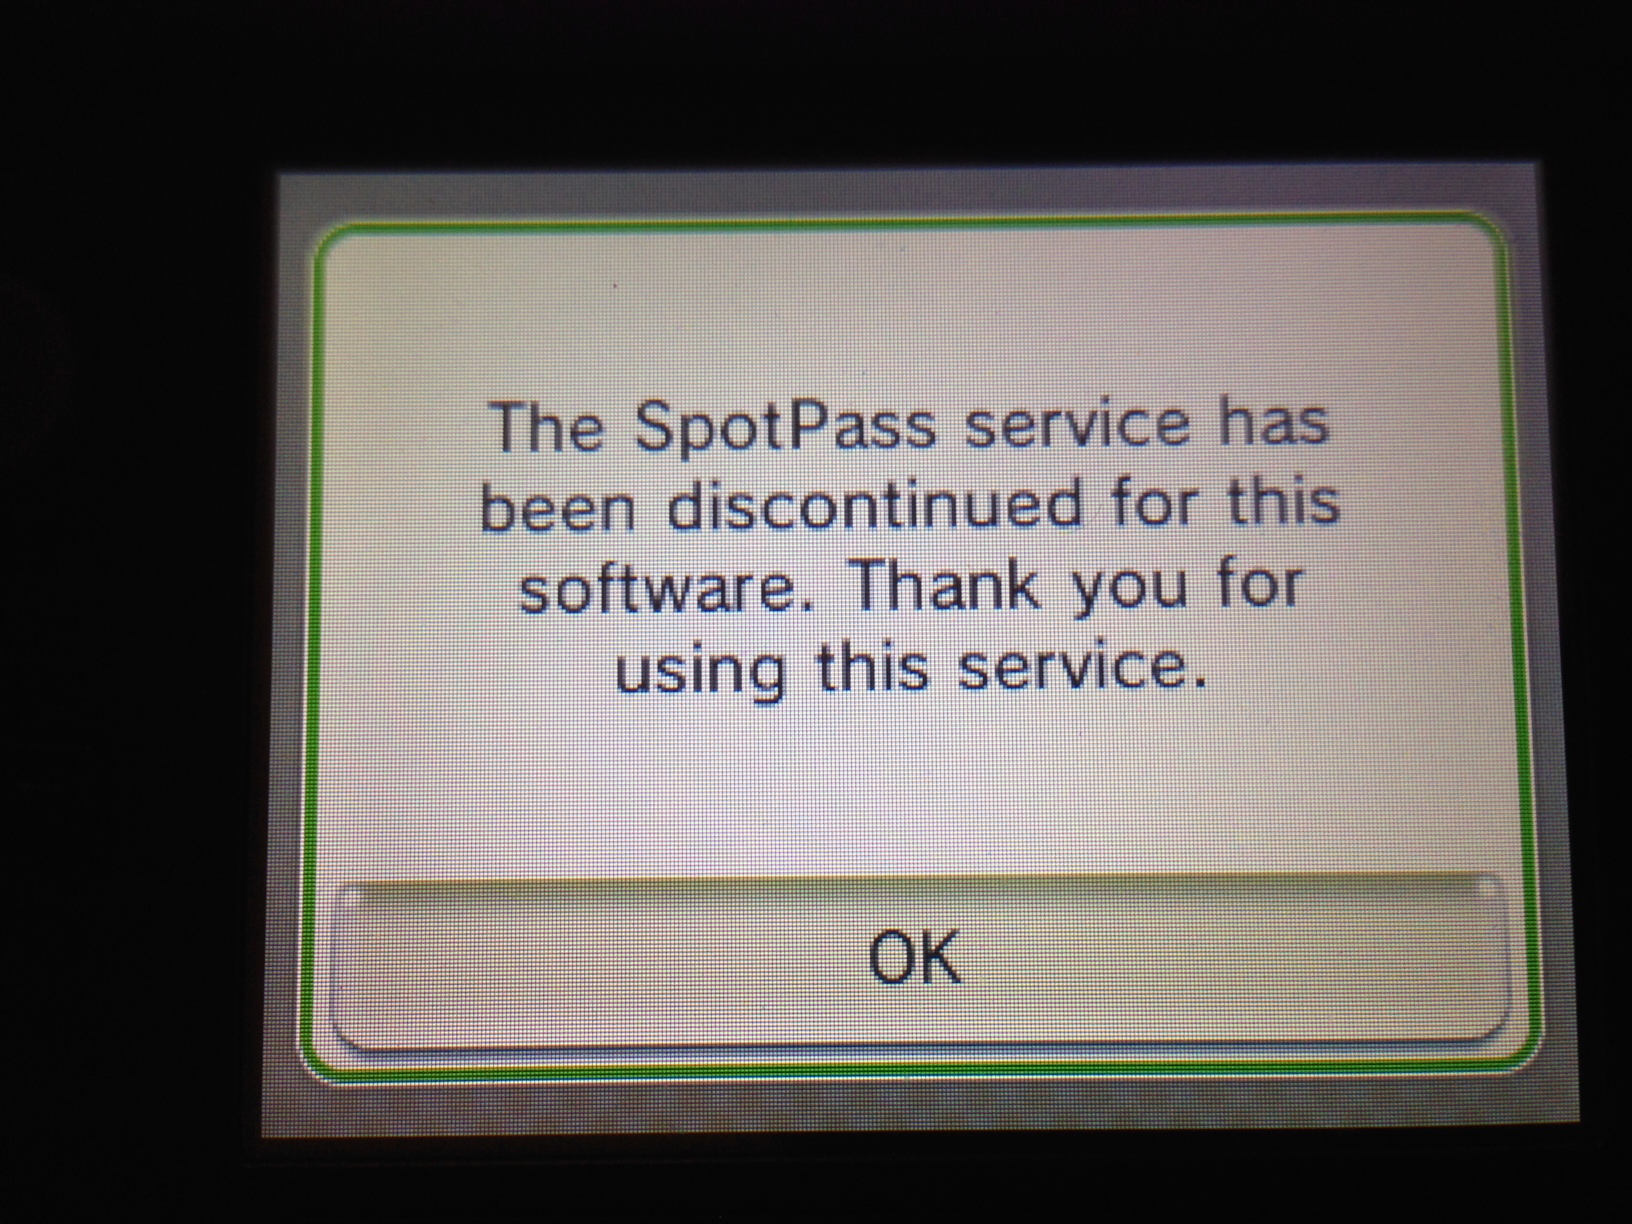 Nintendo Pulls 3DS Feature, Says Kids Were Sharing ‘Offensive Material’